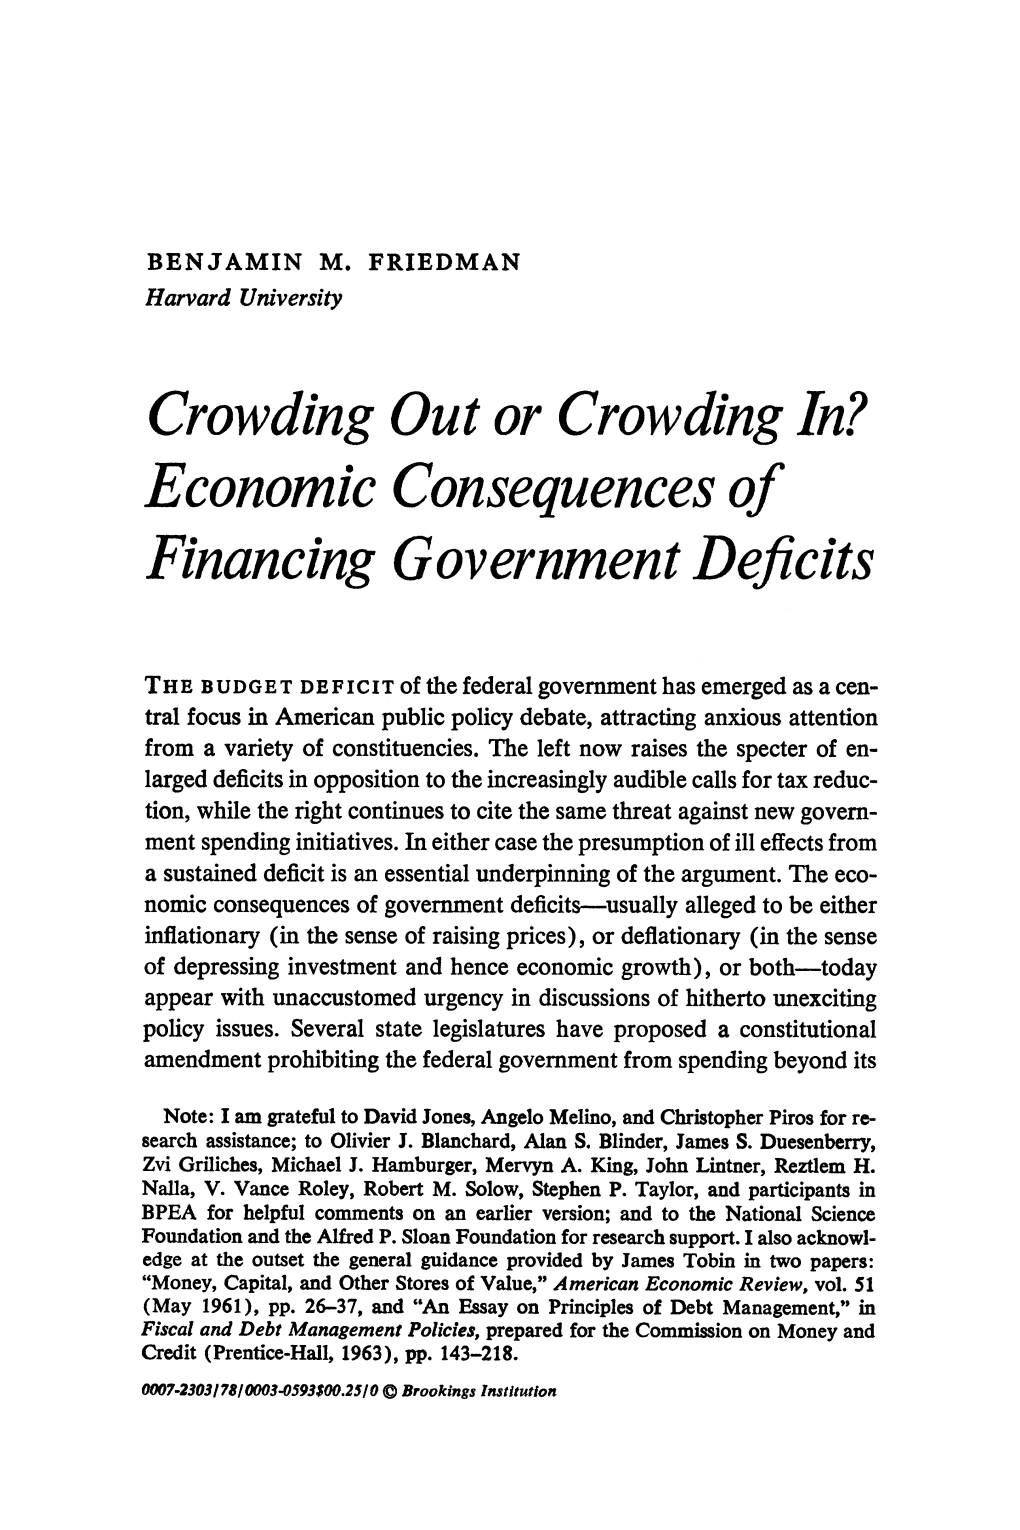 Economic Consequences of Financing Government Deficits